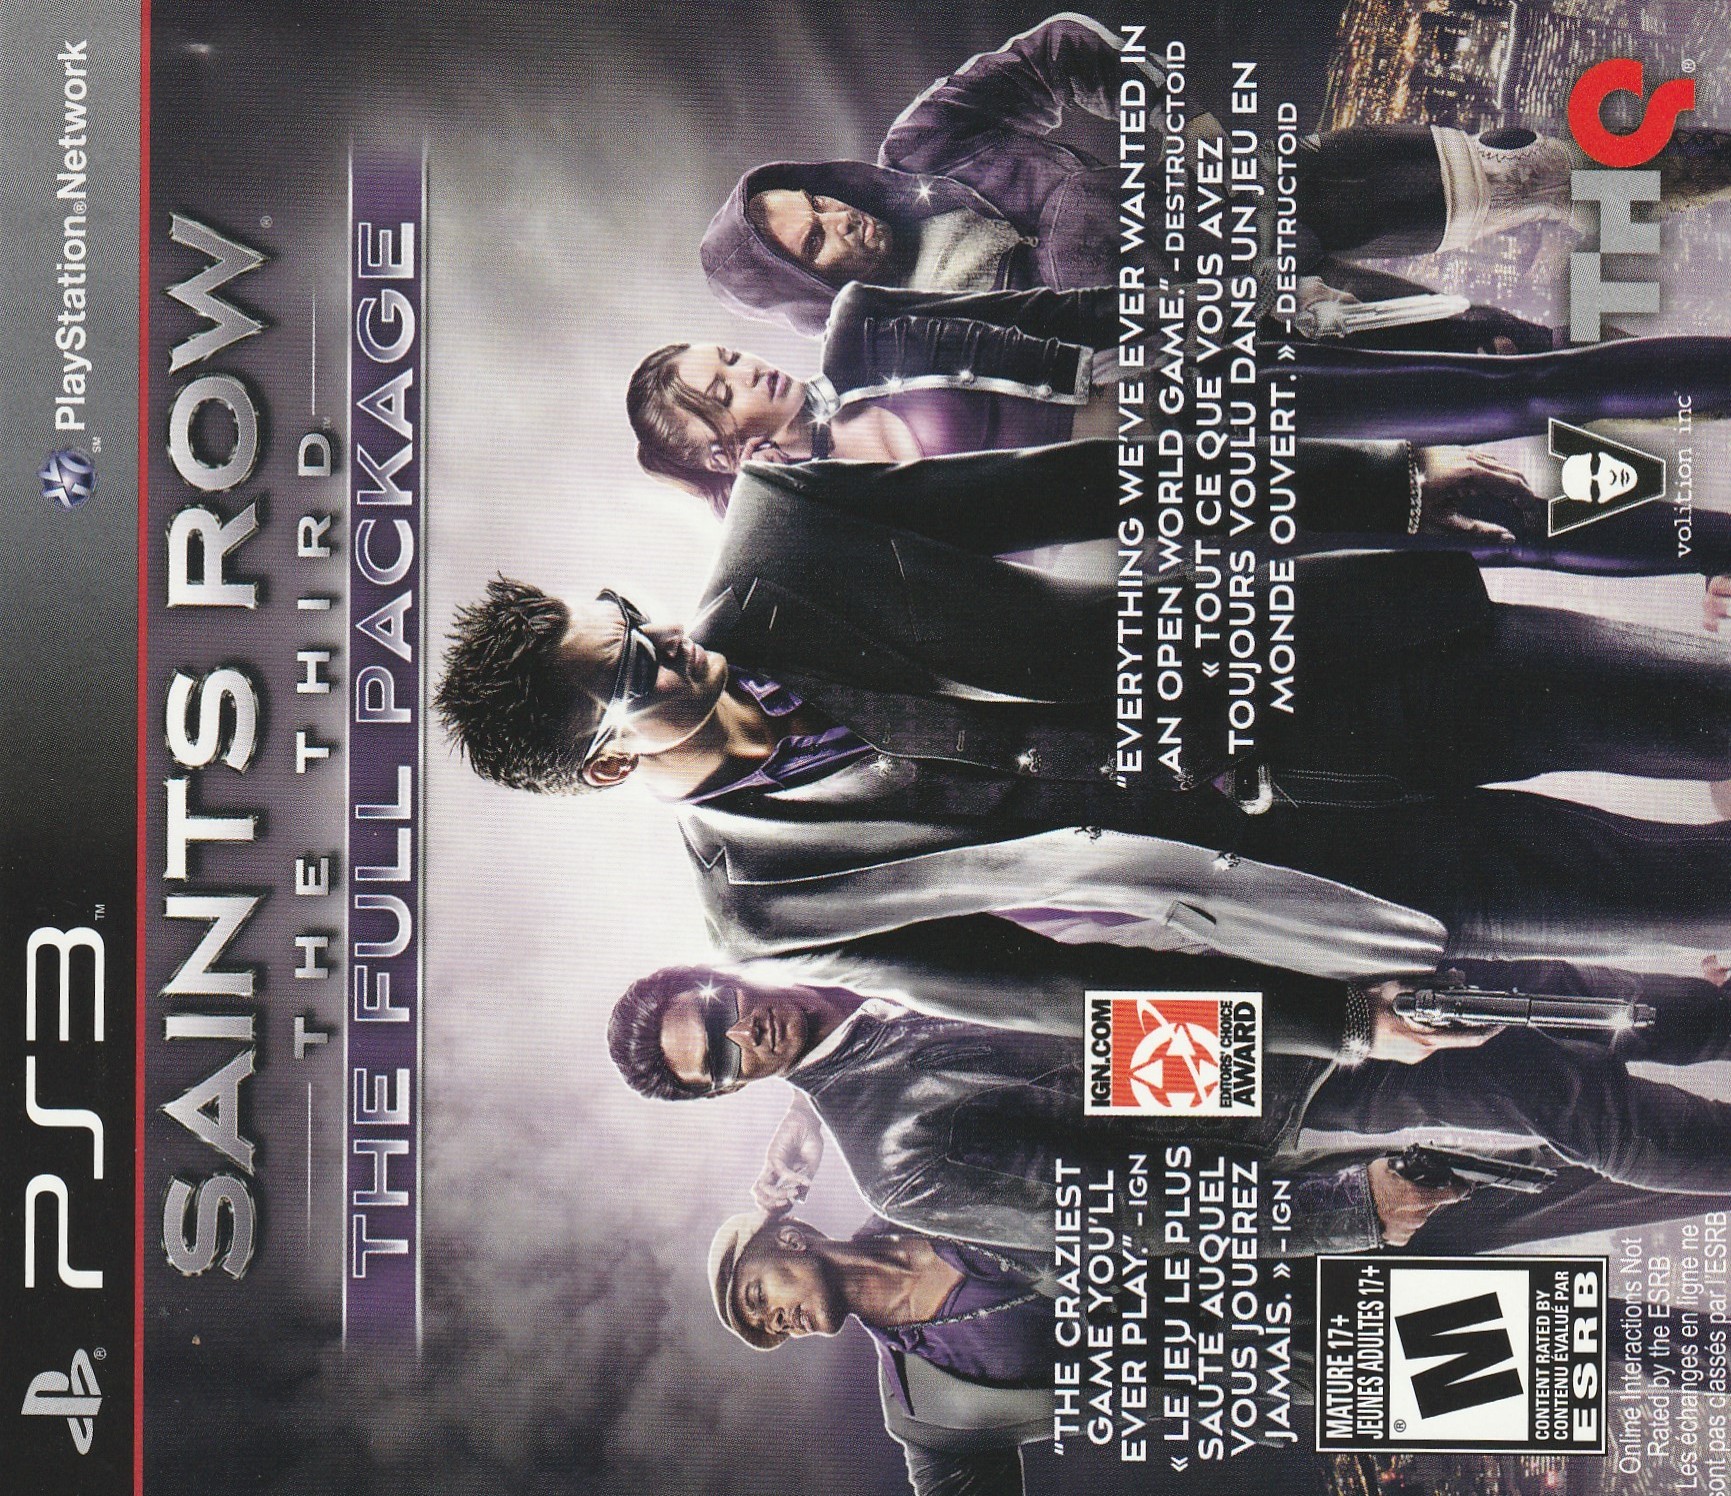 'Saints Row: The Third - the full package'